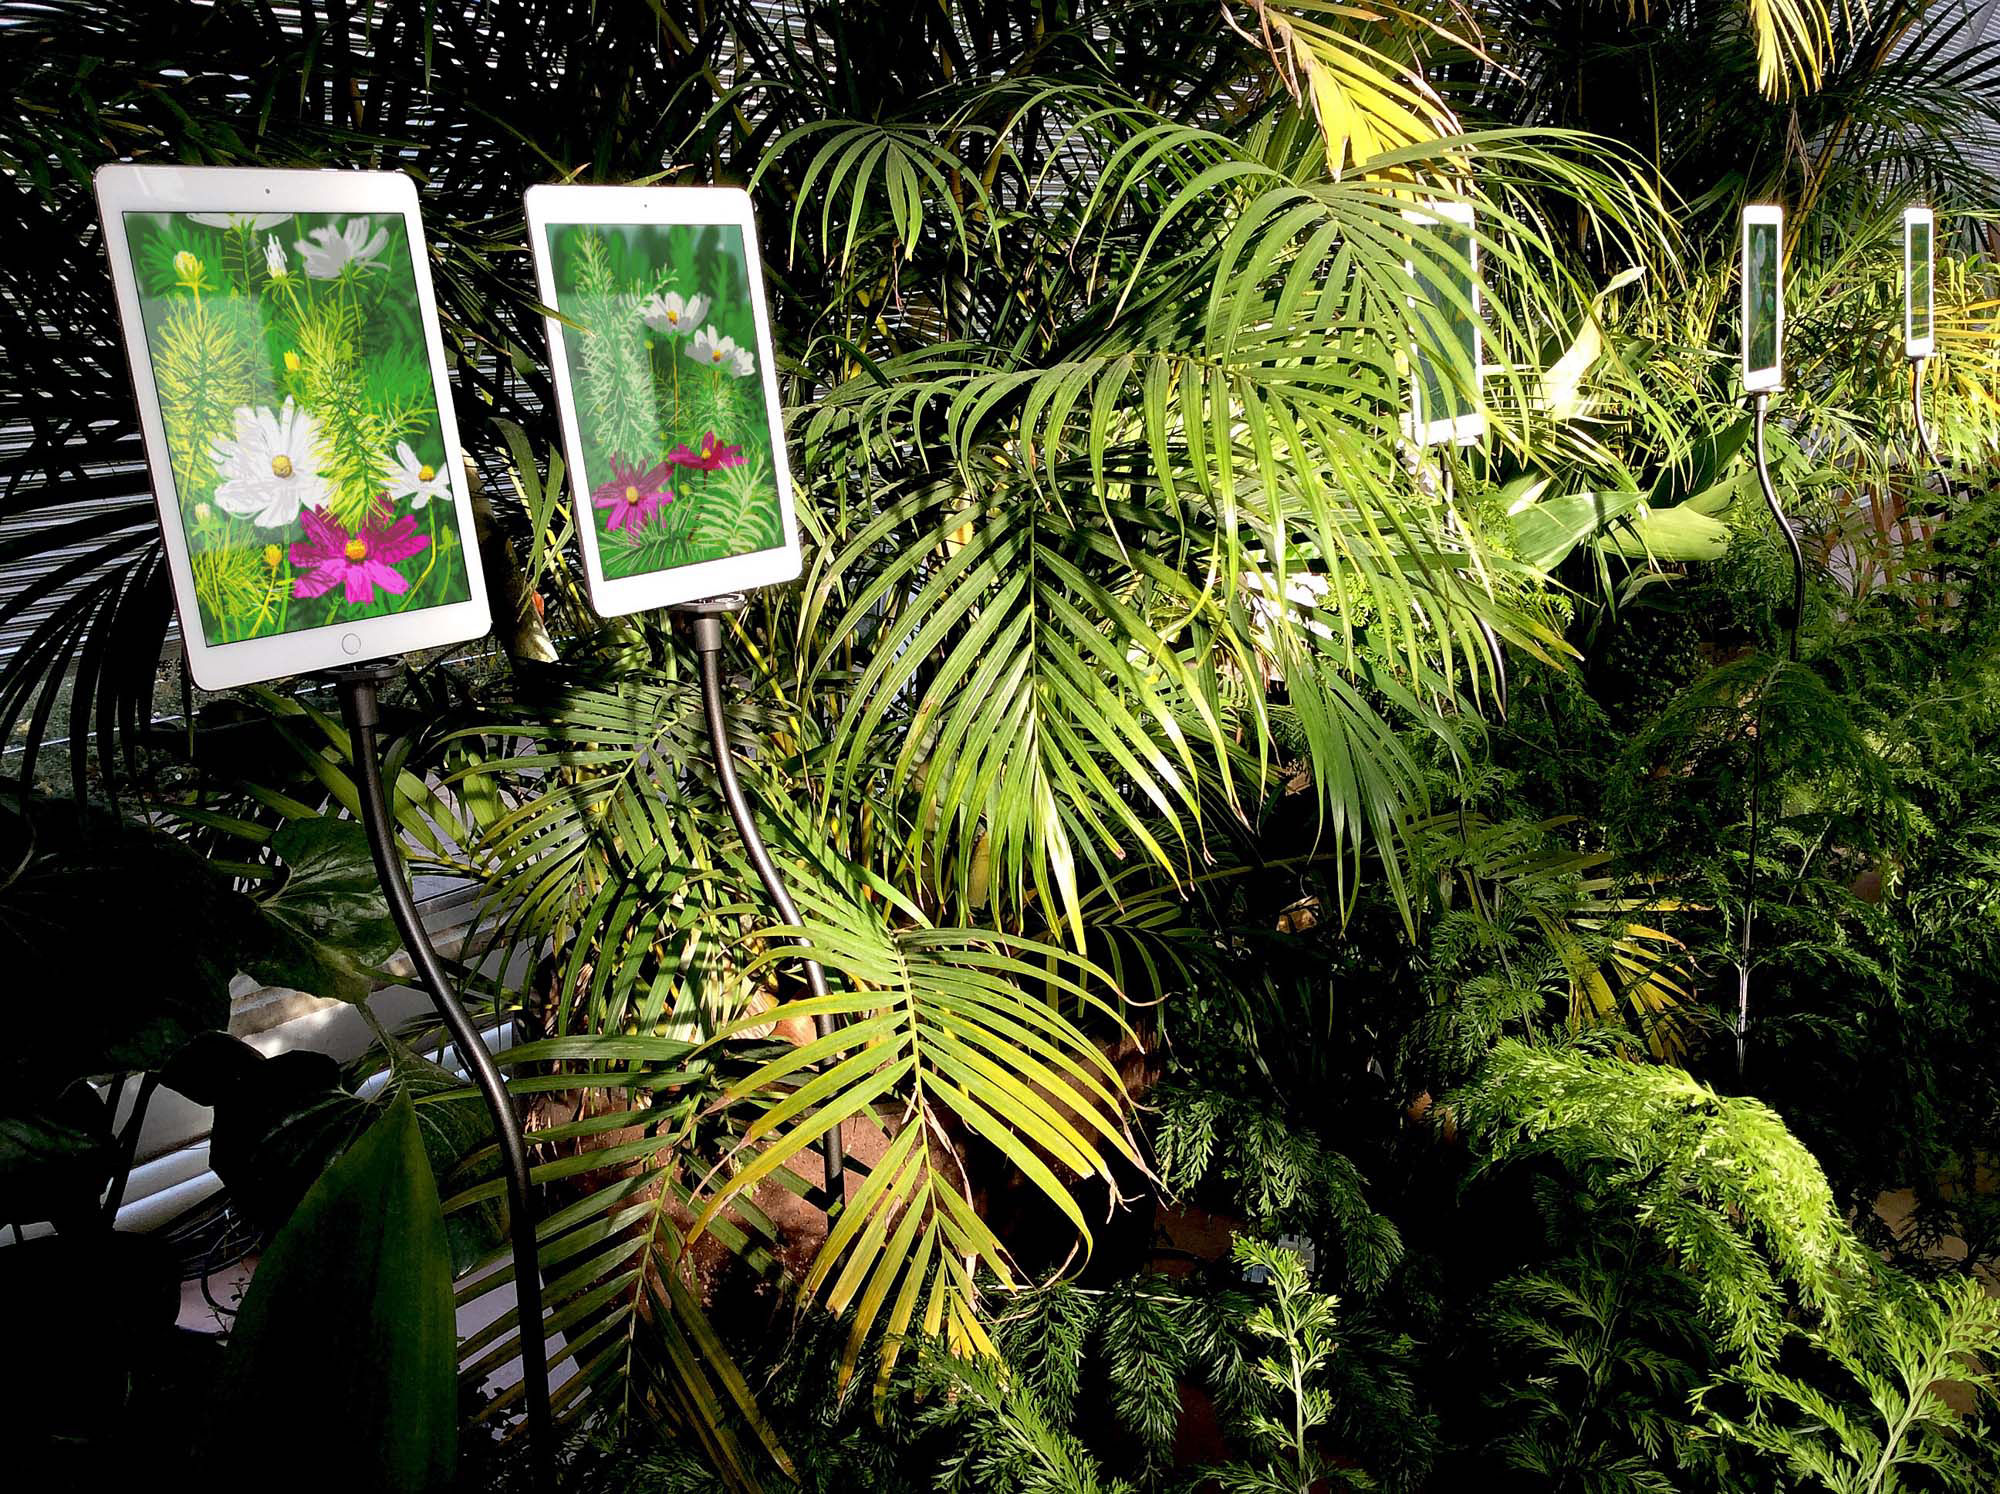 Press Release - Andy Maitland, The Digital Garden 2019, animated iPad drawings, Royal Horticultural Society Garden, Wisley.